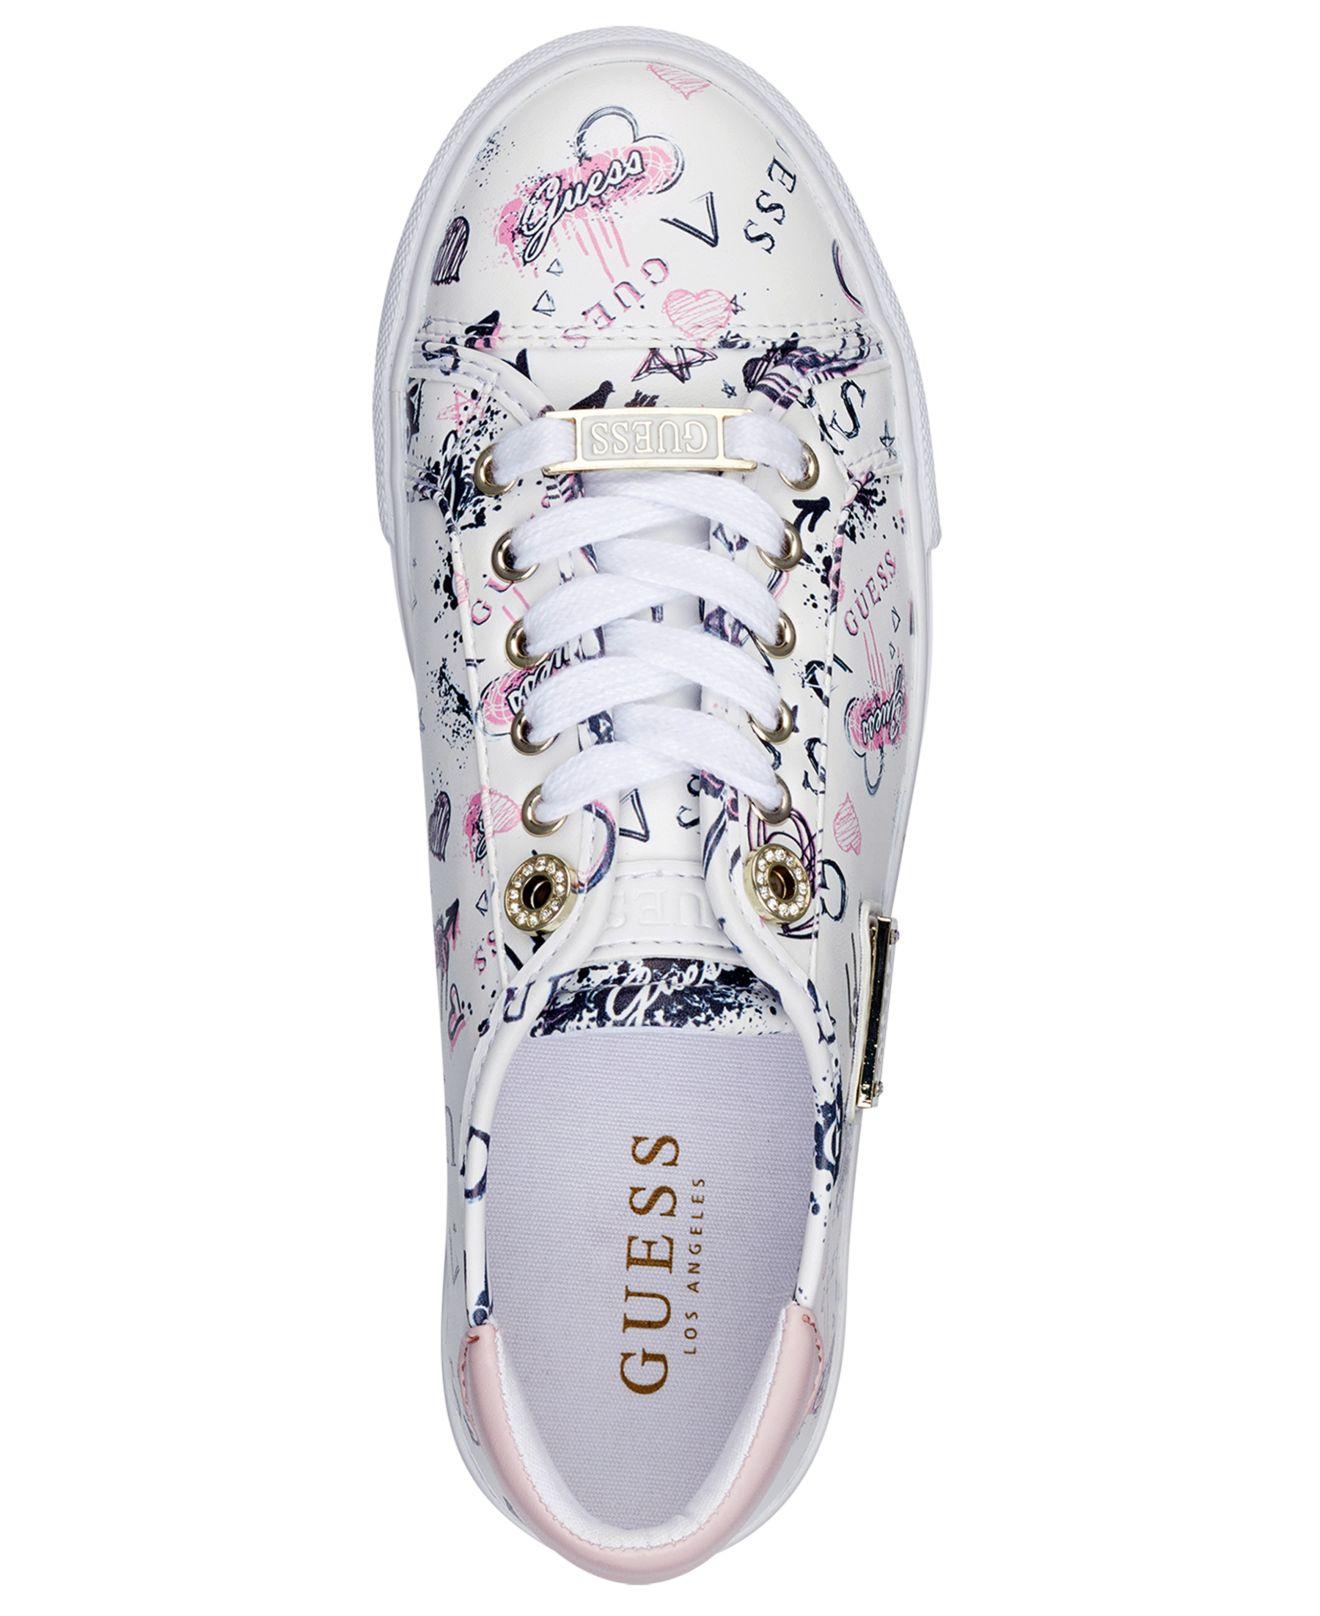 Guess Mineral Sneakers in White - Save 